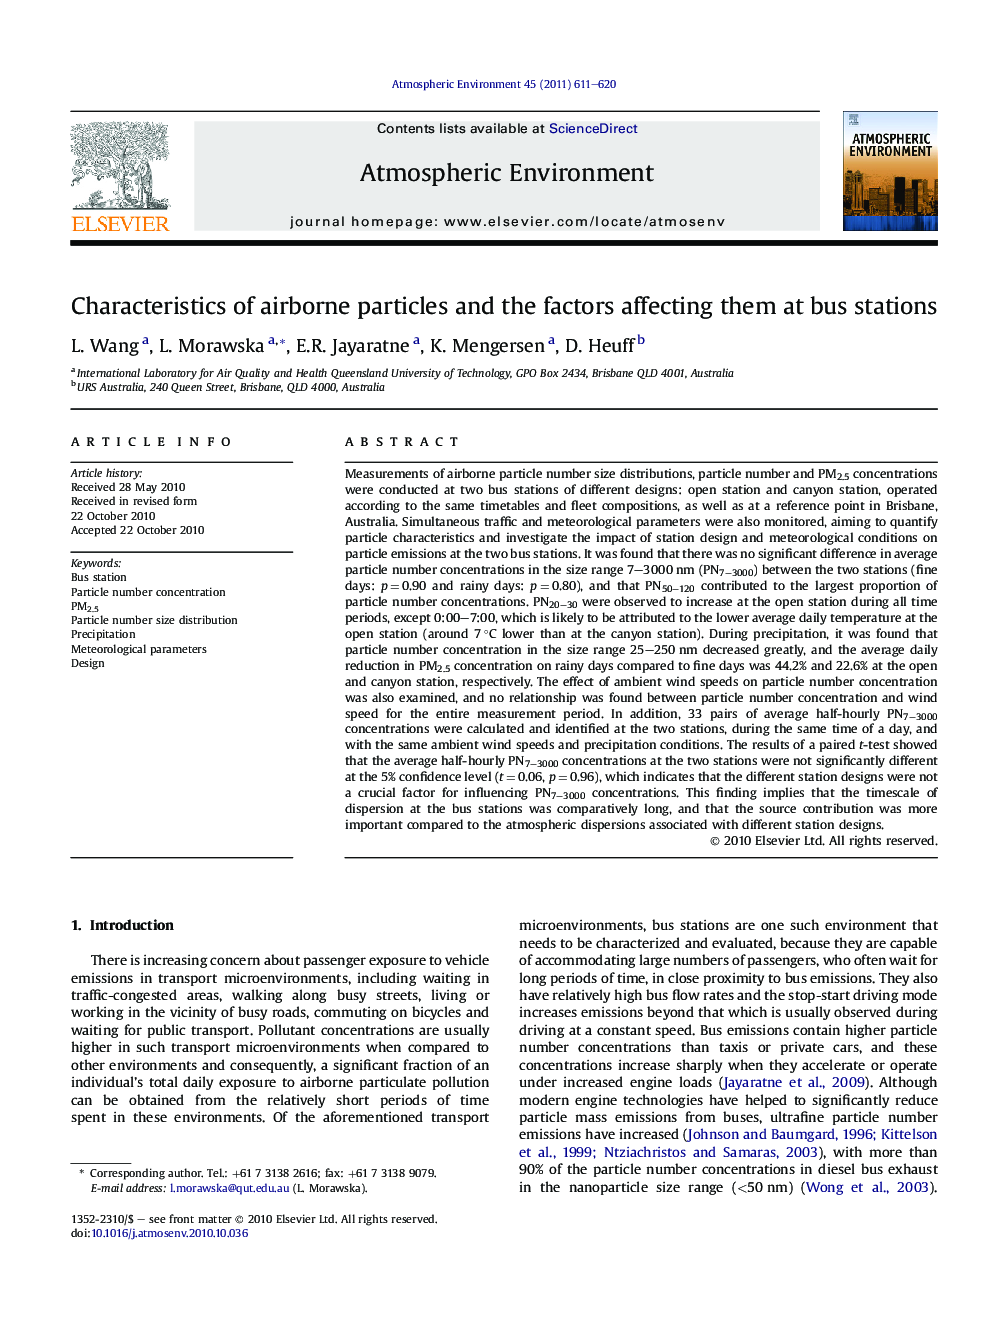 Characteristics of airborne particles and the factors affecting them at bus stations